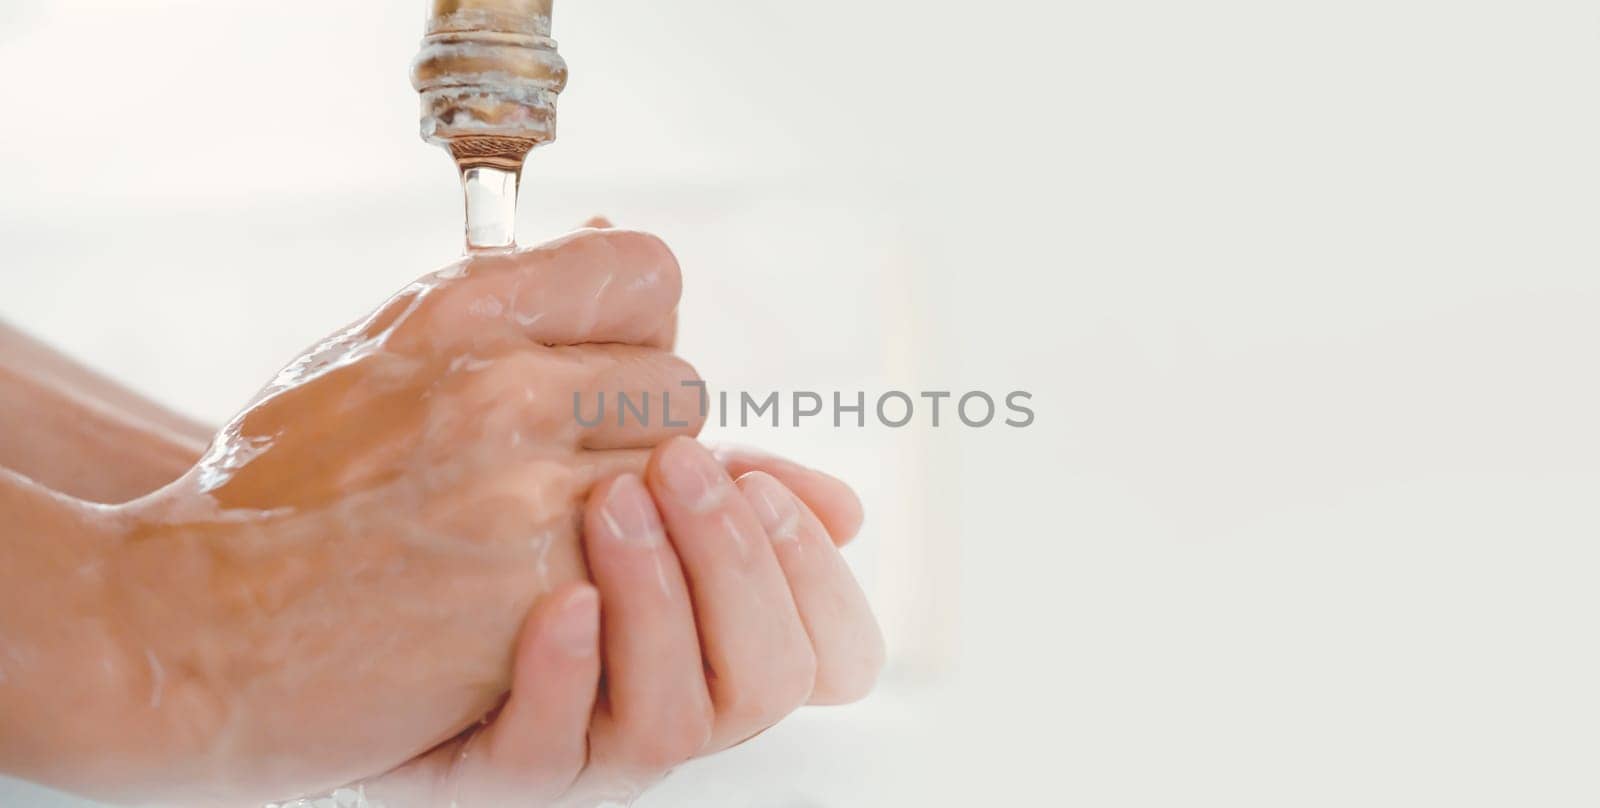 A young girl washes her hands thoroughly with soap under water in the bathroom, close-up view.